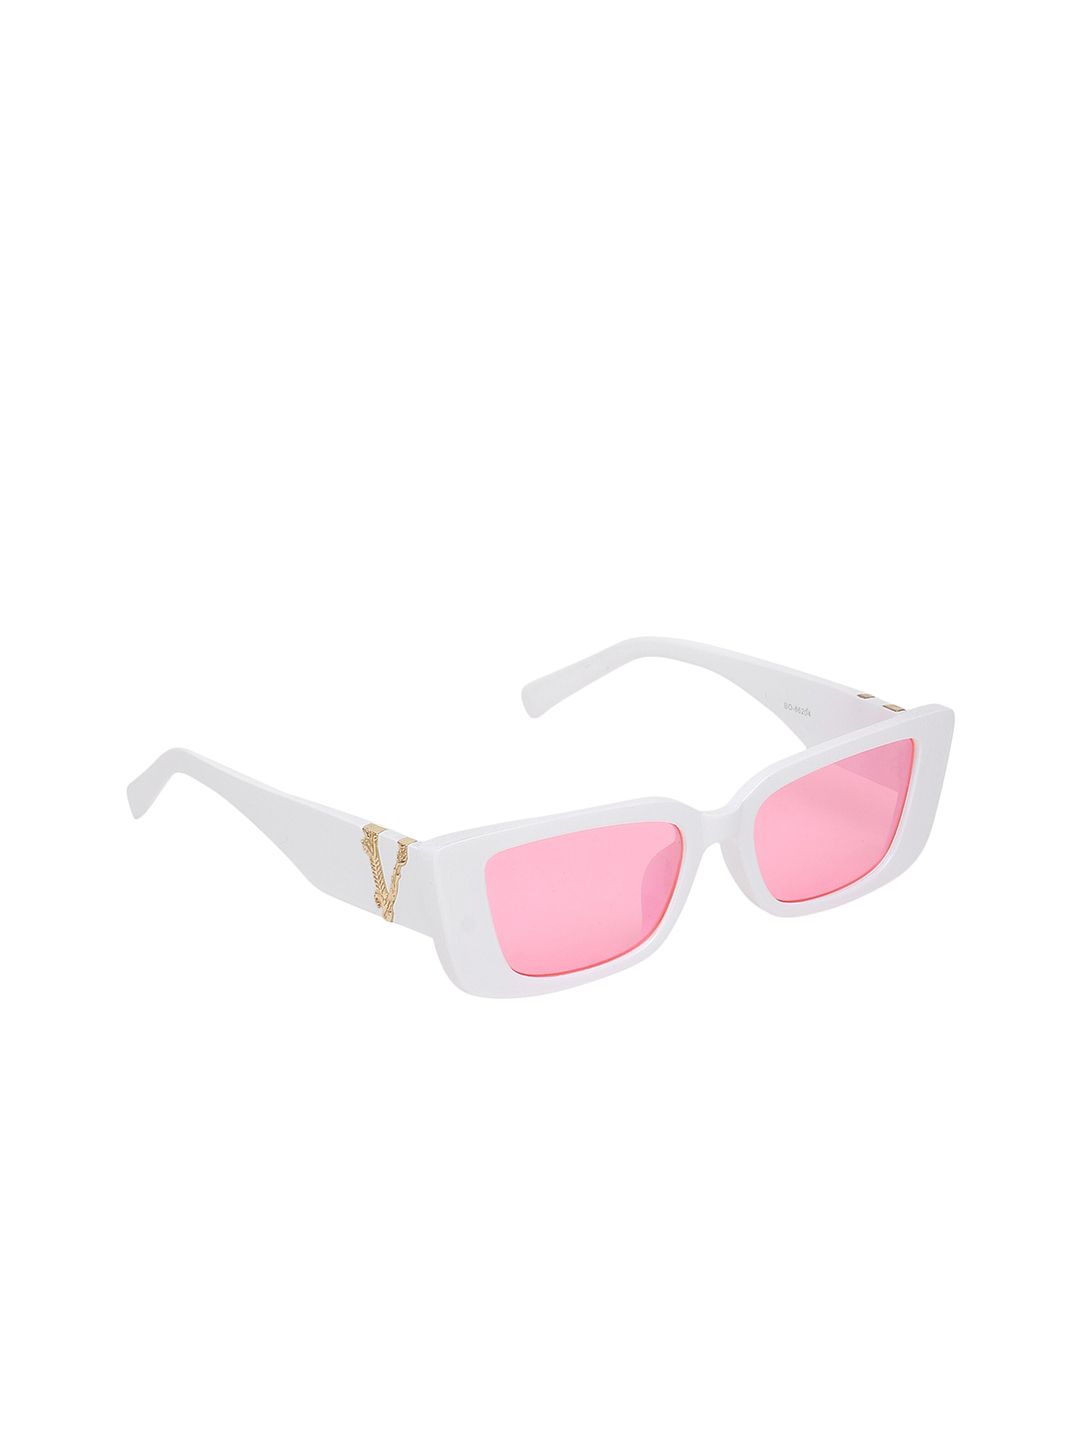 CRIBA Unisex Pink Lens & White Rectangle Sunglasses with UV Protected Lens Price in India